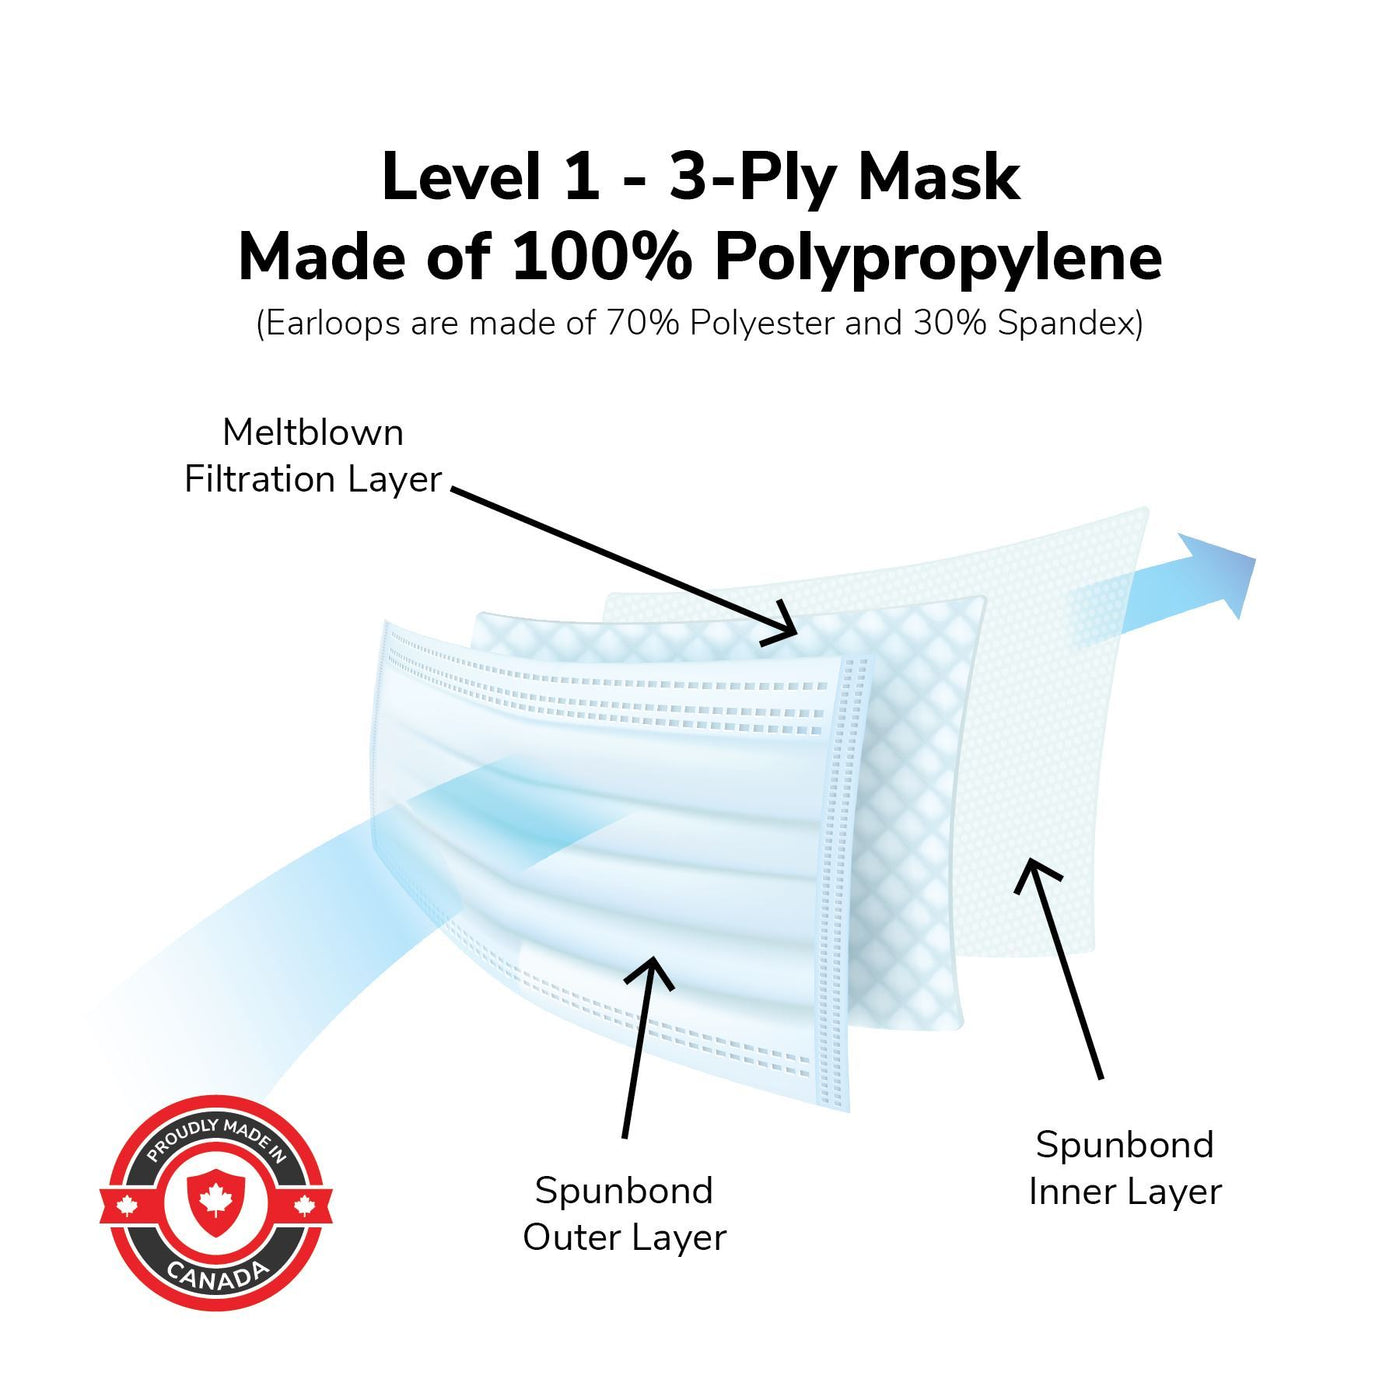 The Canadian Shield medical-grade ASTM Level 1 Procedural Surgical Face Mask